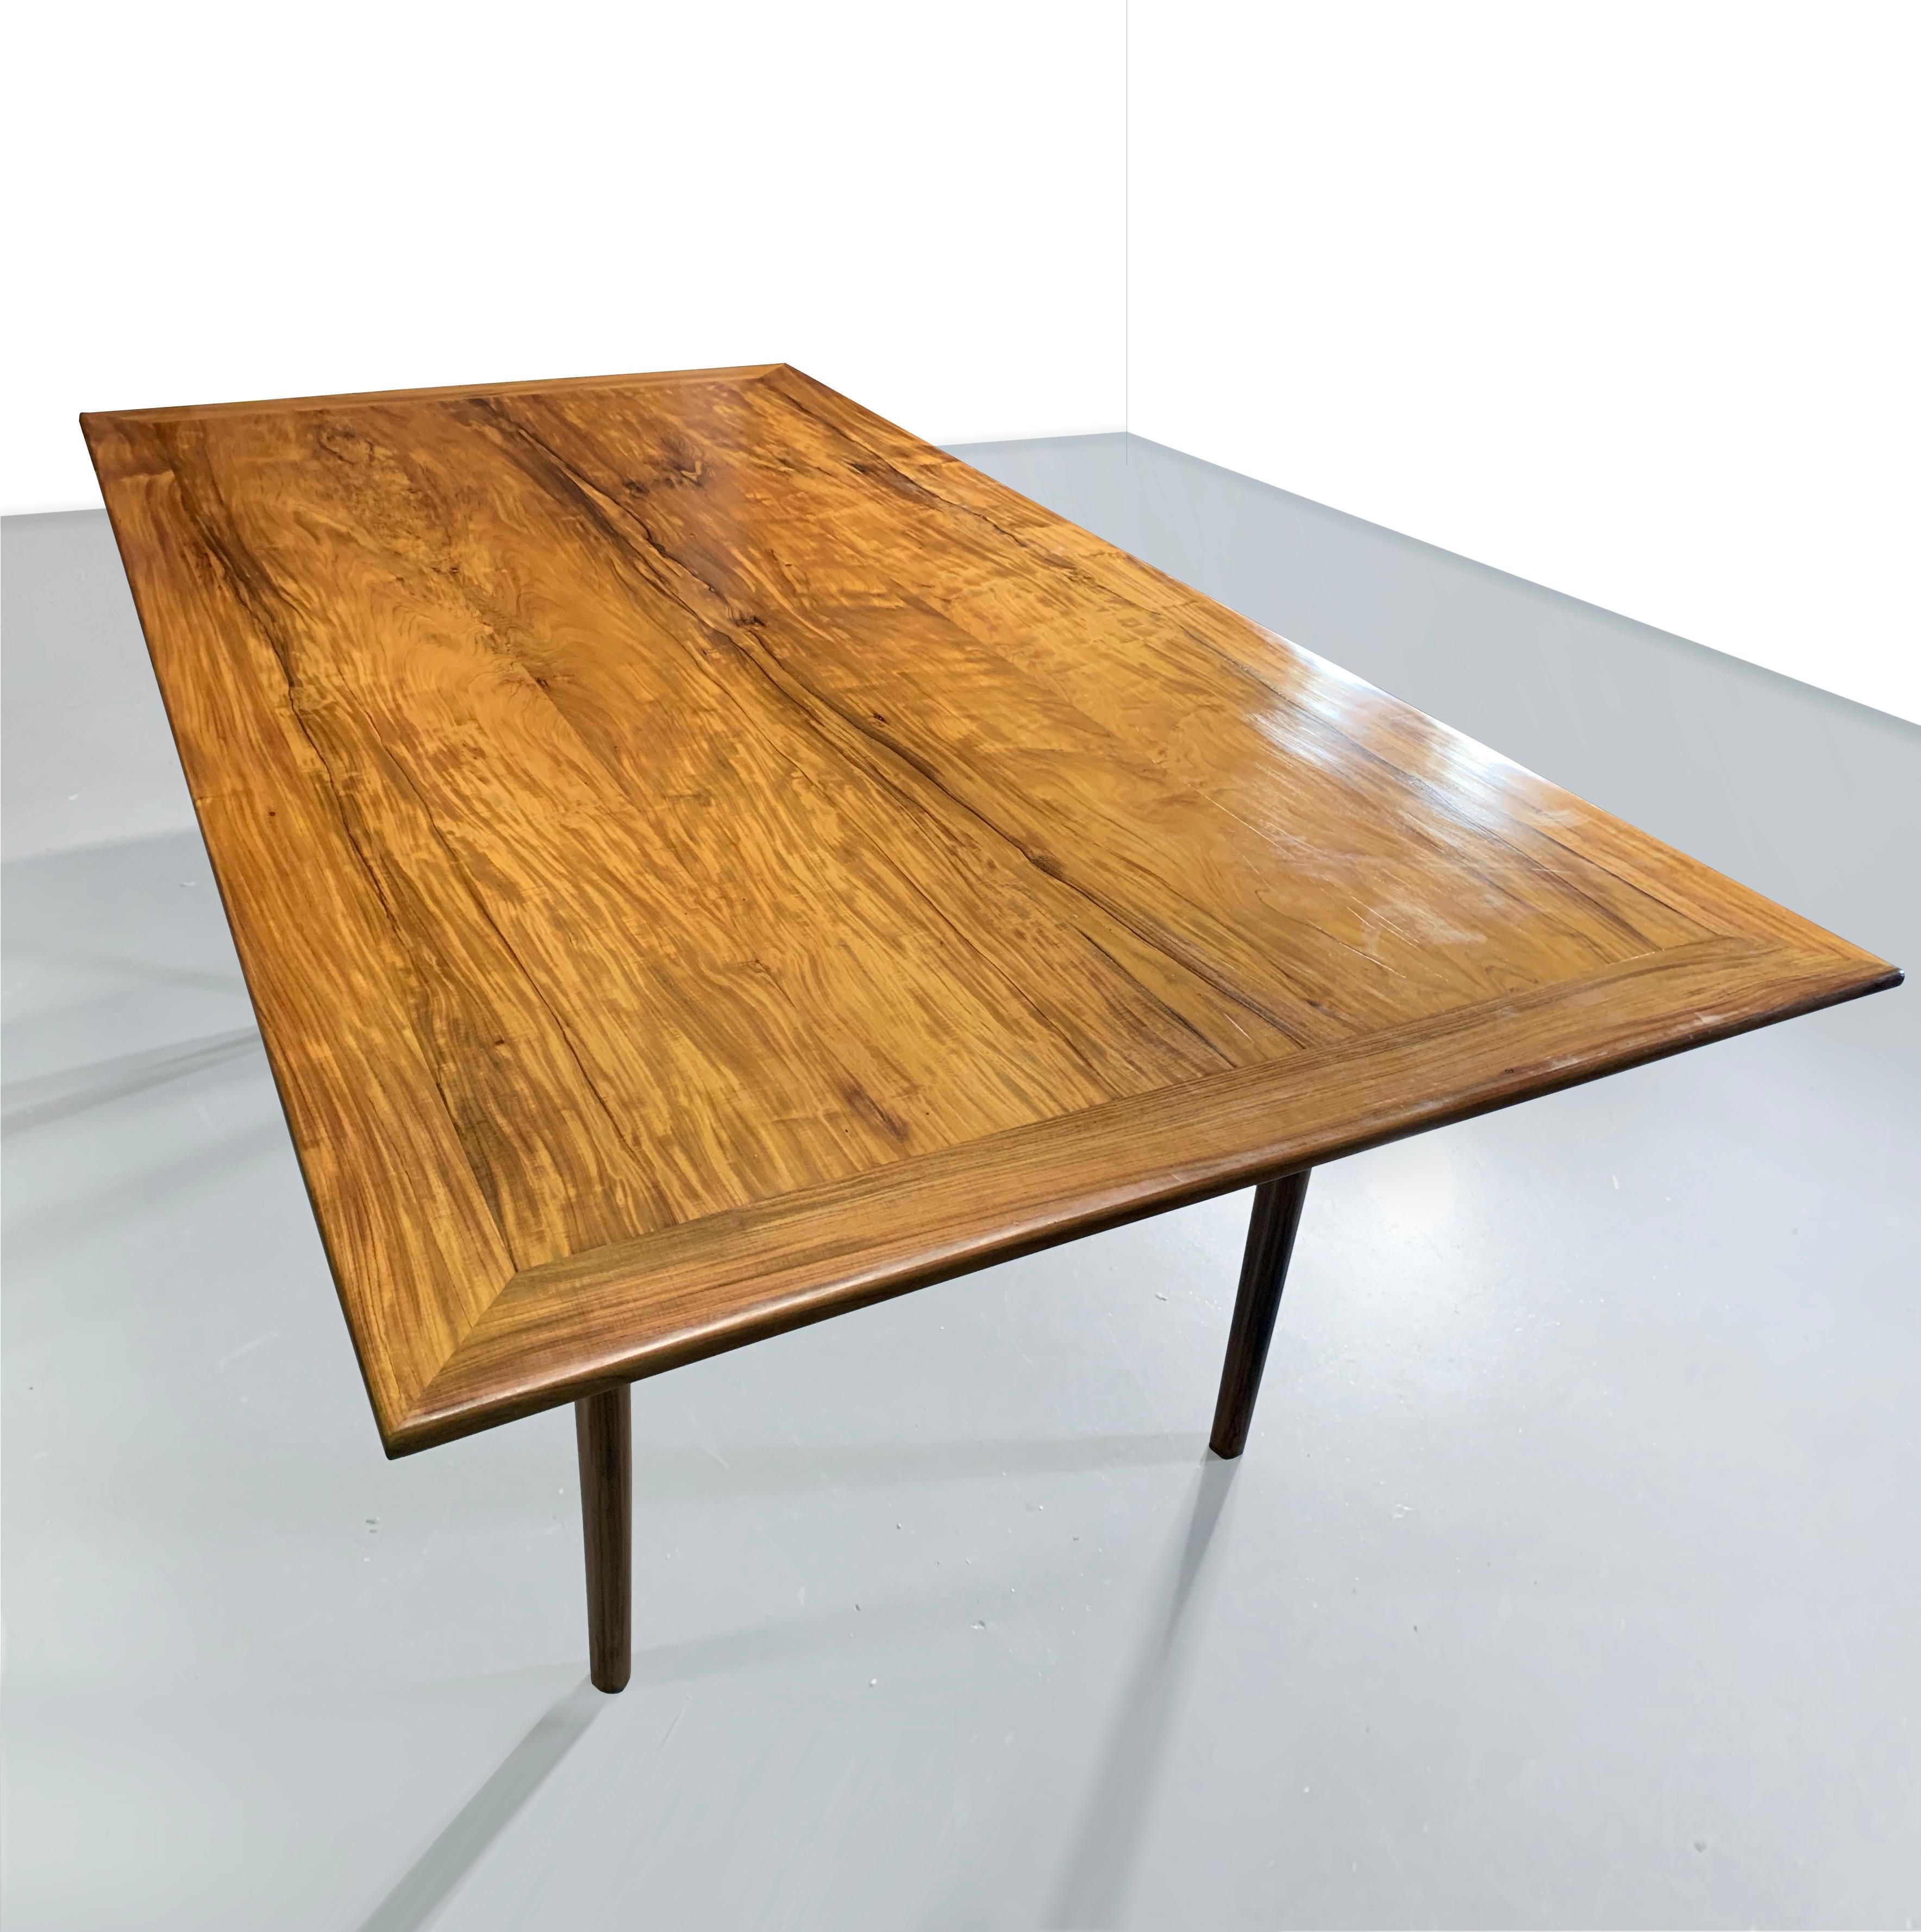 Branco & Preto
Designed and manufactured in the 1950s by Branco & Preto
This stunning solid wood dining table by Branco & Preto was part of the personal collection of Miguel Forte, one of the founding members of Branco & Preto. 
This is part of a